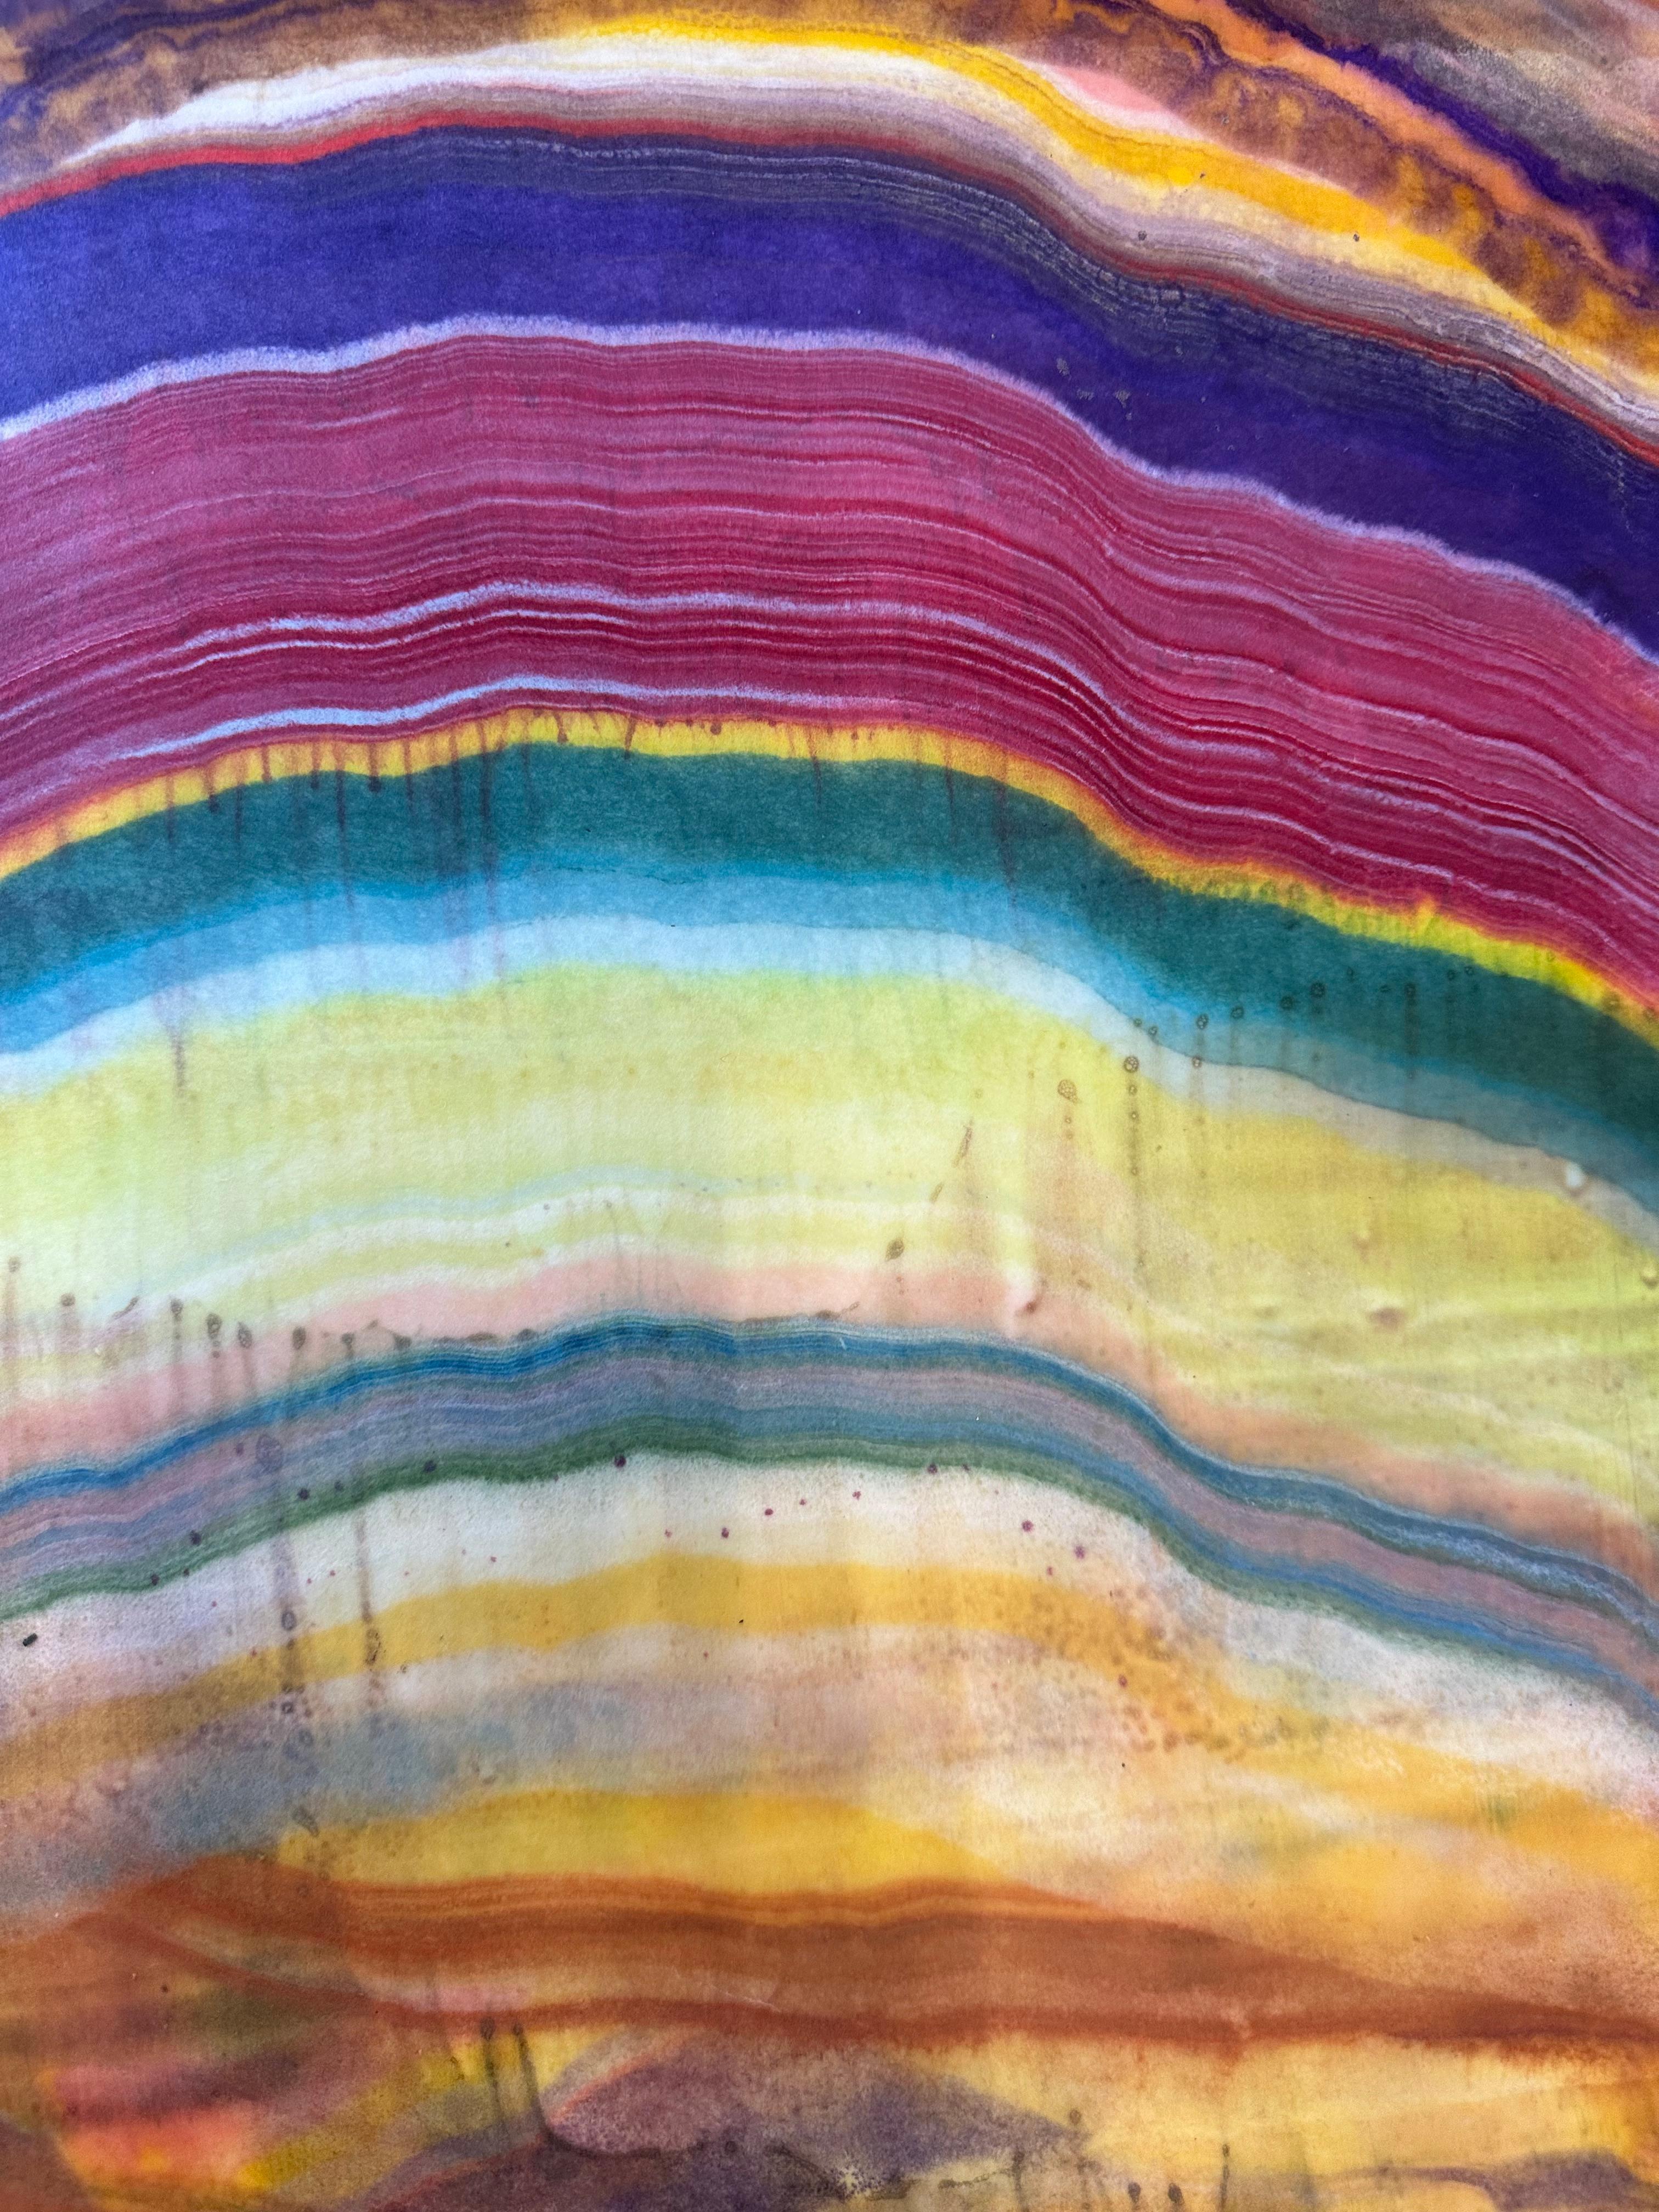 Laura Moriarty's Talking to Rocks 1 is a multicolored encaustic monotype on kozo paper. Layers of pigmented beeswax on lightweight paper create an undulating composition suggesting layers of the earth's crust and geological formations in bright